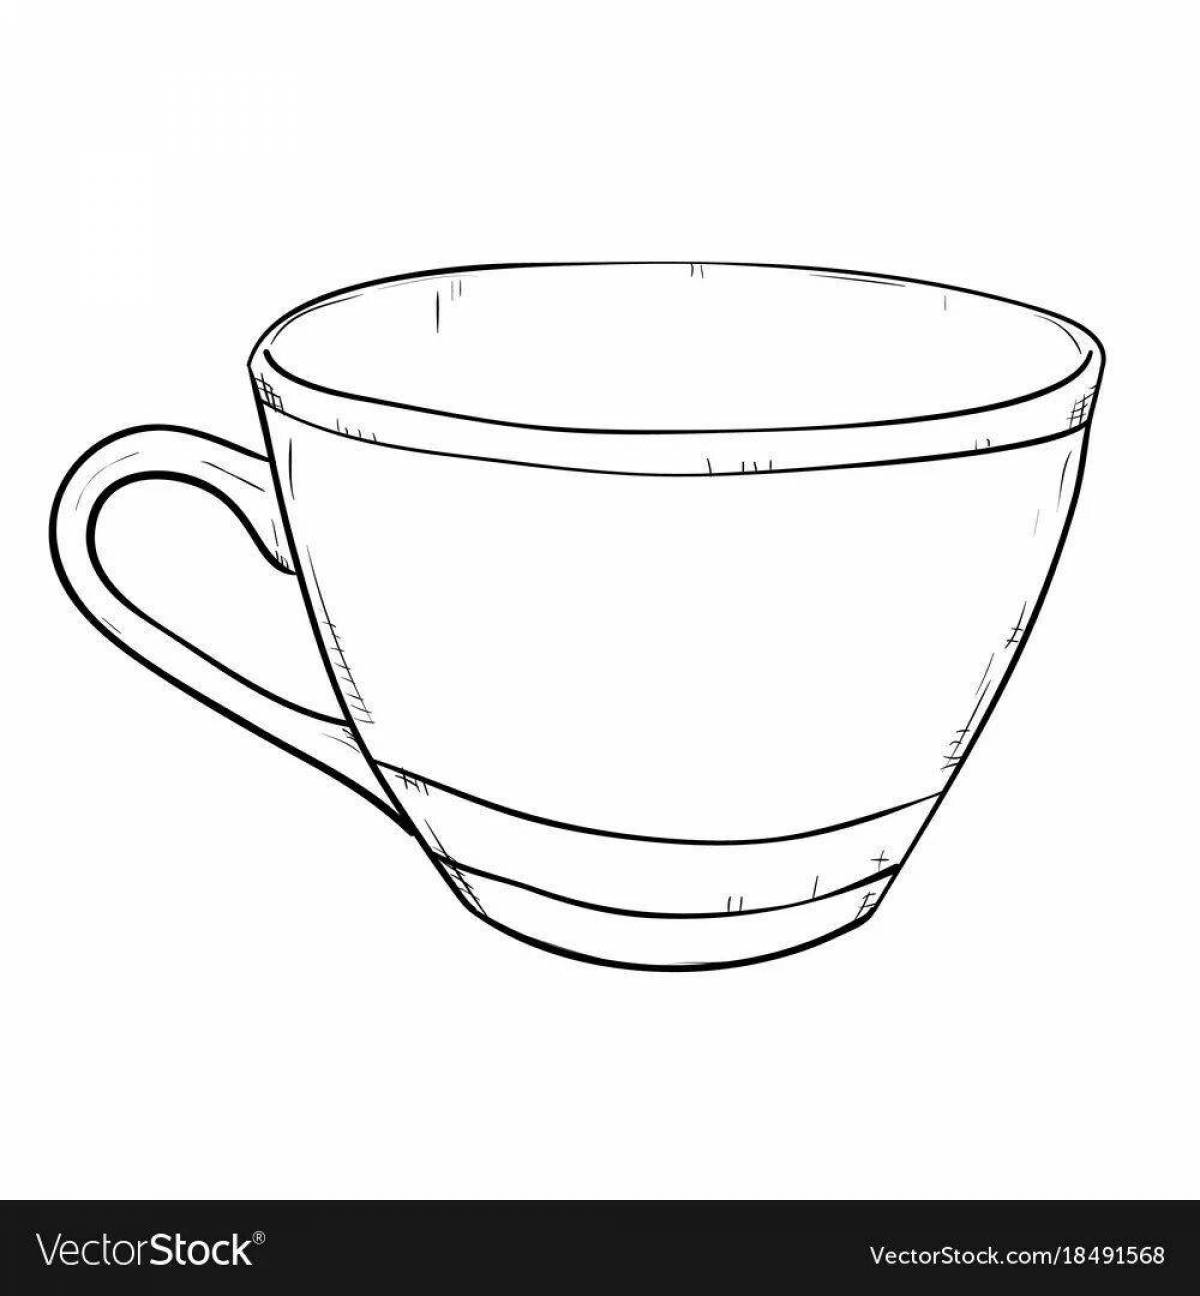 Coloring page of a playful cup pattern